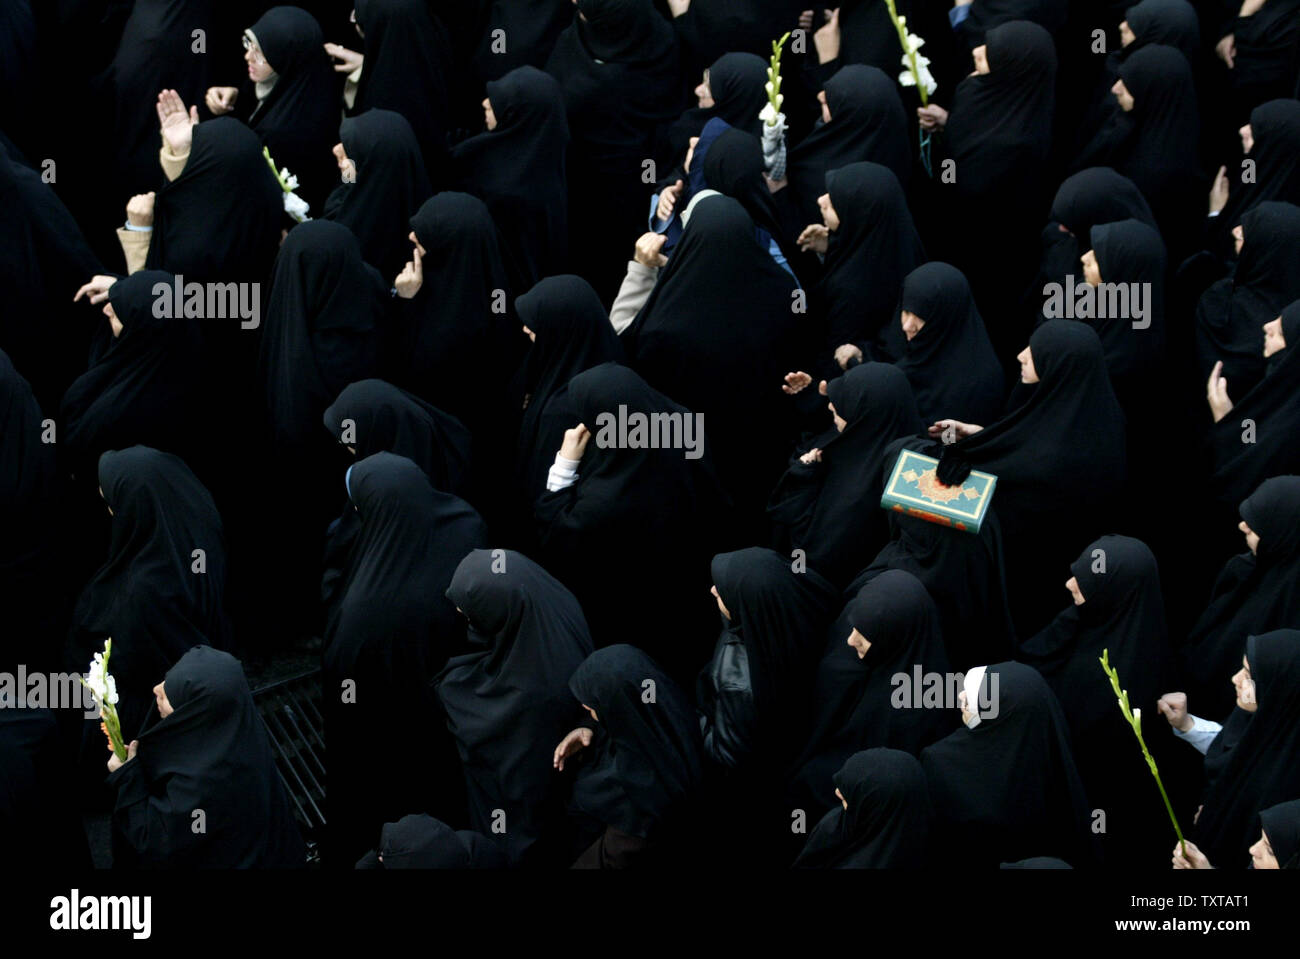 Iranian women, one holding a Koran, follow a truck carrying the dead during a funeral ceremony for 110 people that were killed during the 8-year Iran-Iraq war, whose bodies were finally recovered after 17 years, in Tehran, Iran, on November 25, 2005.   (UPI Photo/Mohammad Kheirkhah) Stock Photo